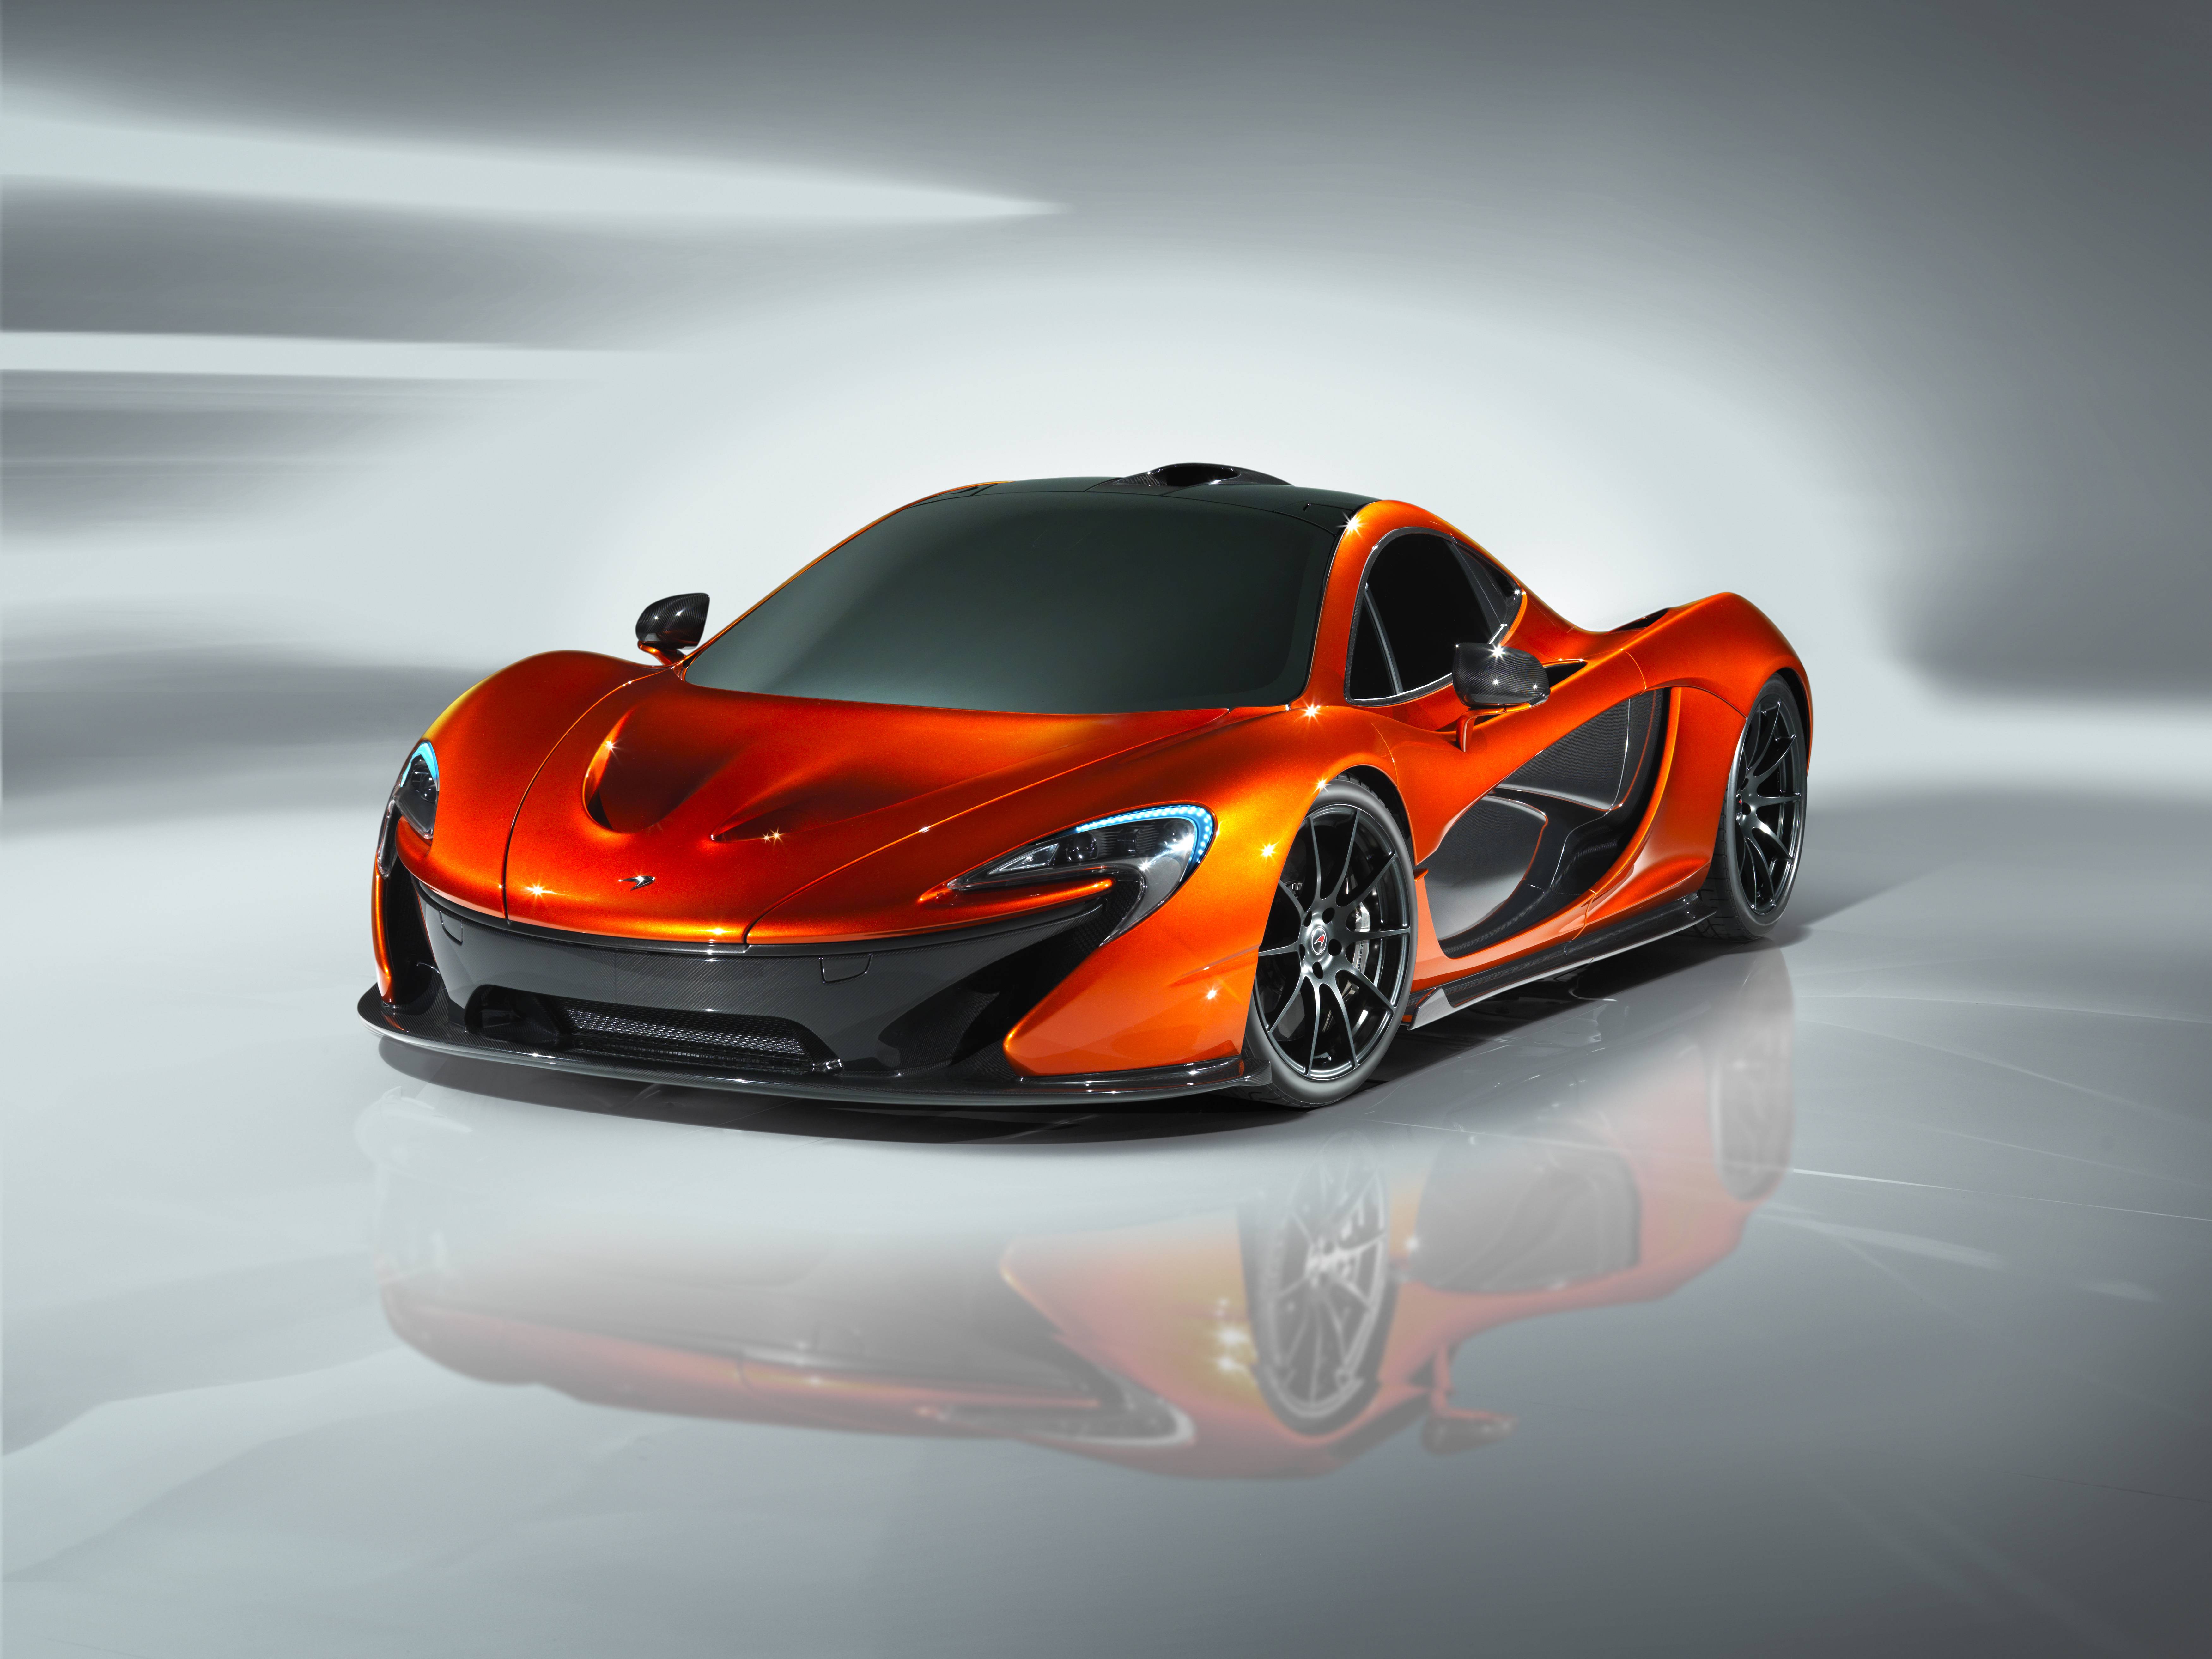 2560x1440 Volcano Orange Mclaren P1 1440p Resolution Hd 4k Wallpapers Images Backgrounds Photos And Pictures